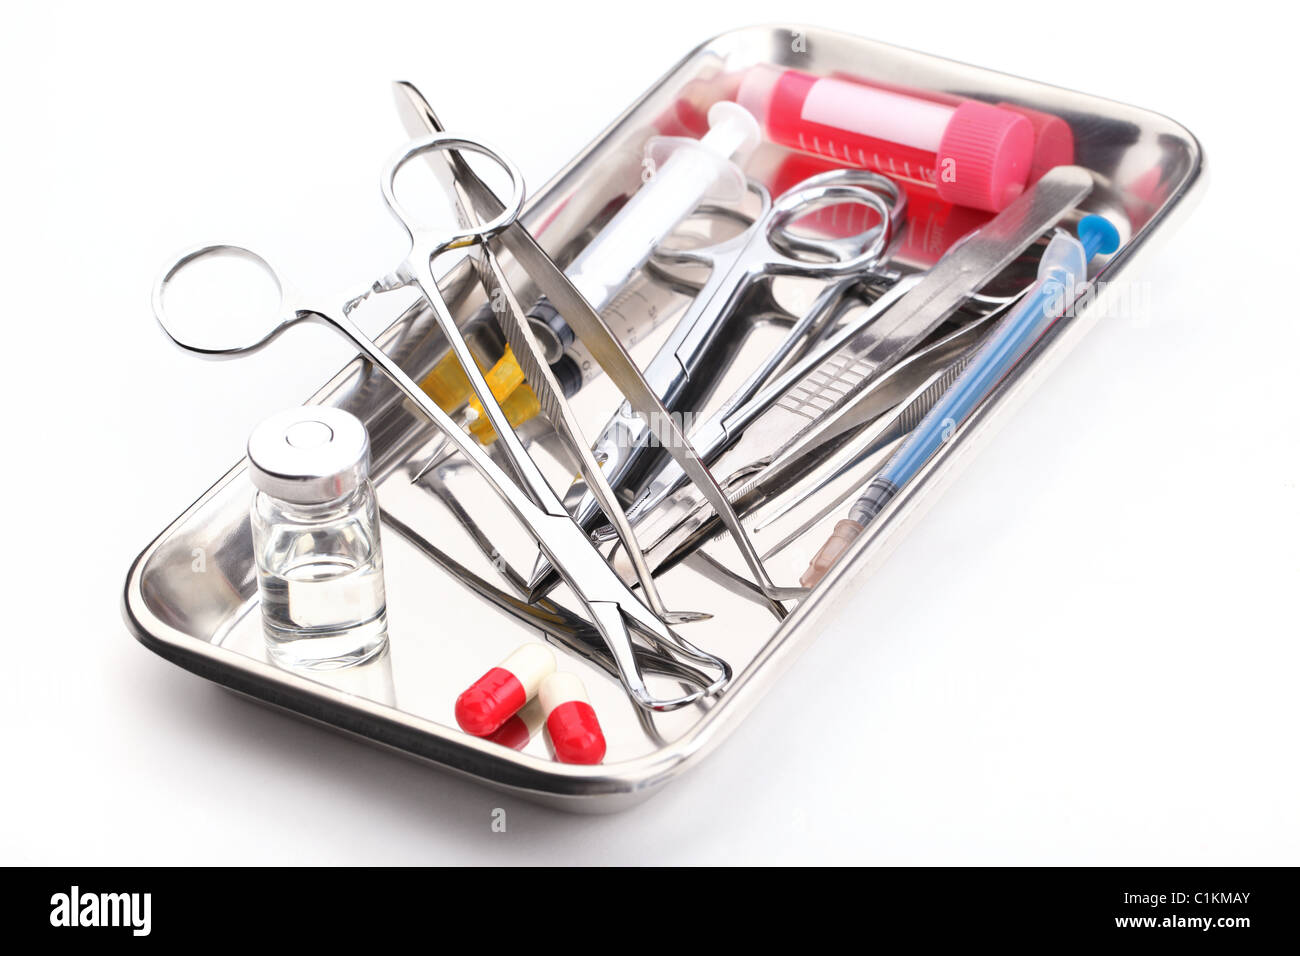 Medical instruments in a steel tray Stock Photo